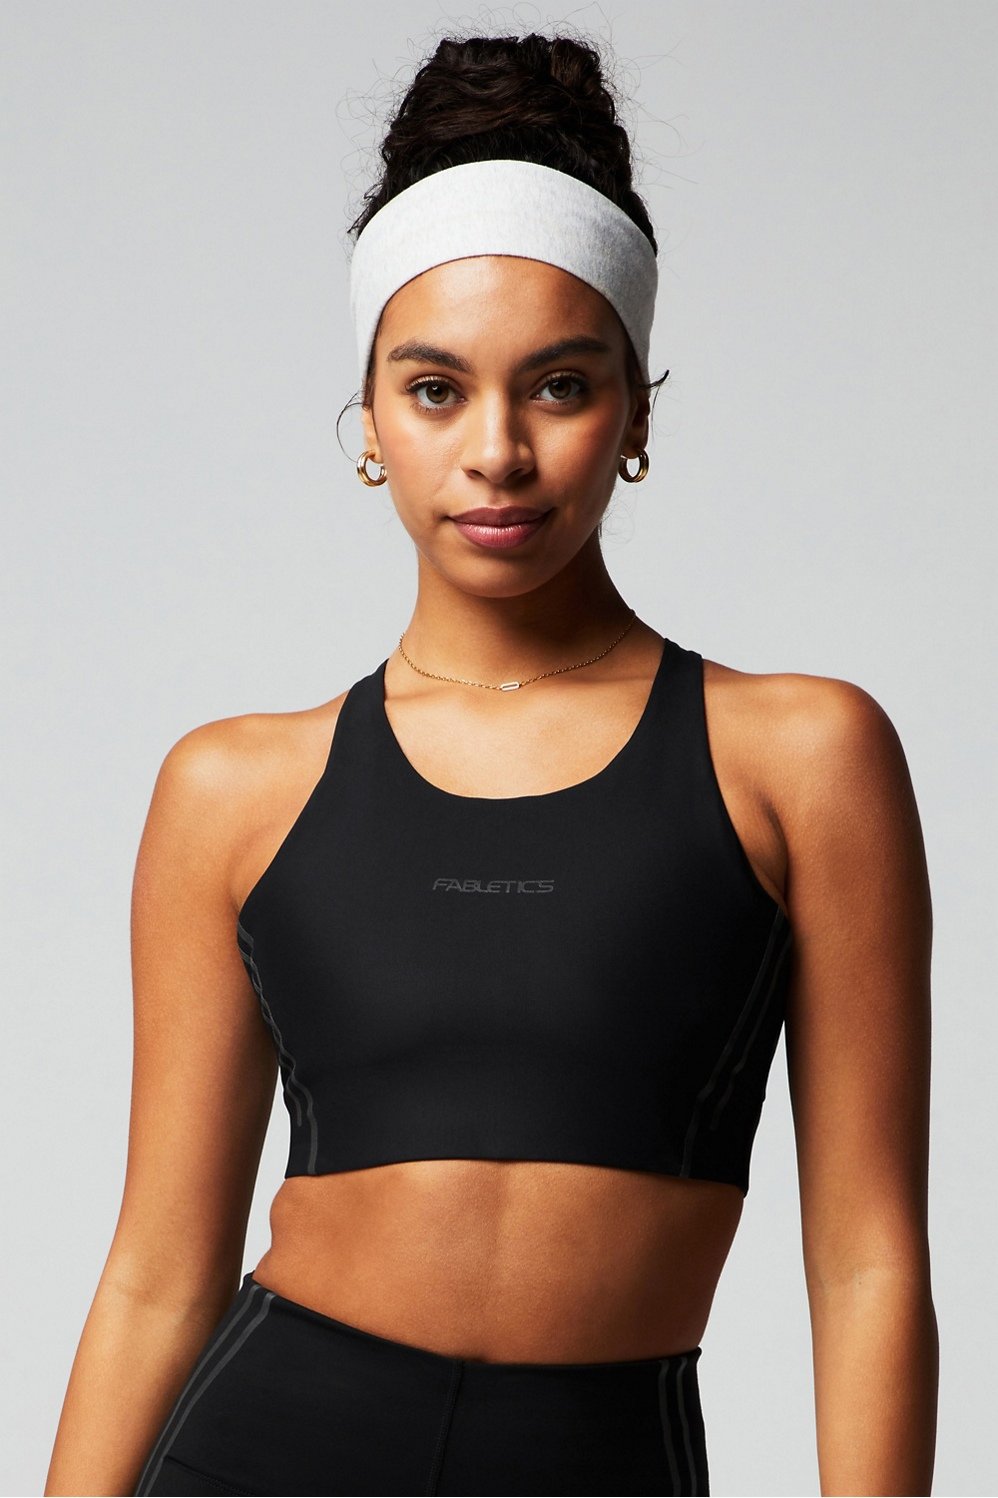 Got Your Back Bra by Nimble Activewear Online, THE ICONIC